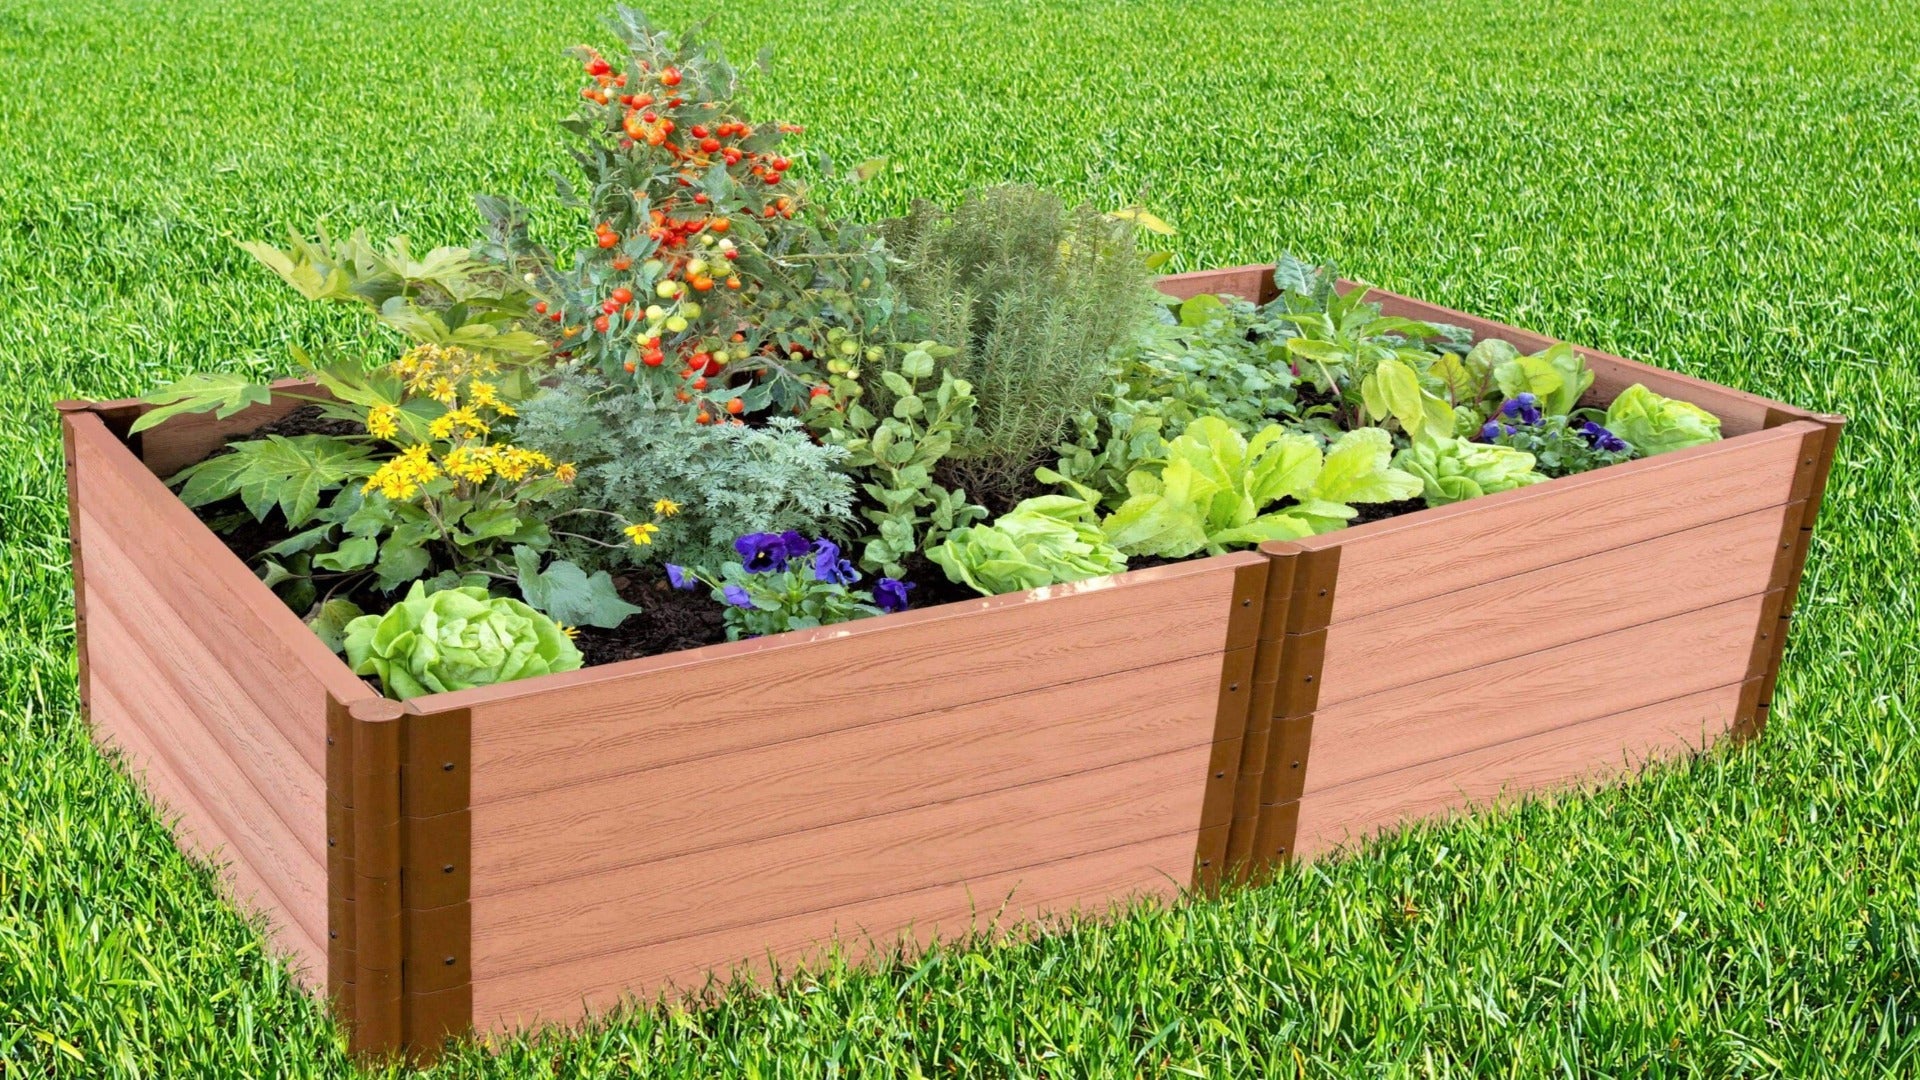 Tool-Free 4' x 8' Raised Garden Bed Raised Garden Beds Frame It All Classic Sienna 2